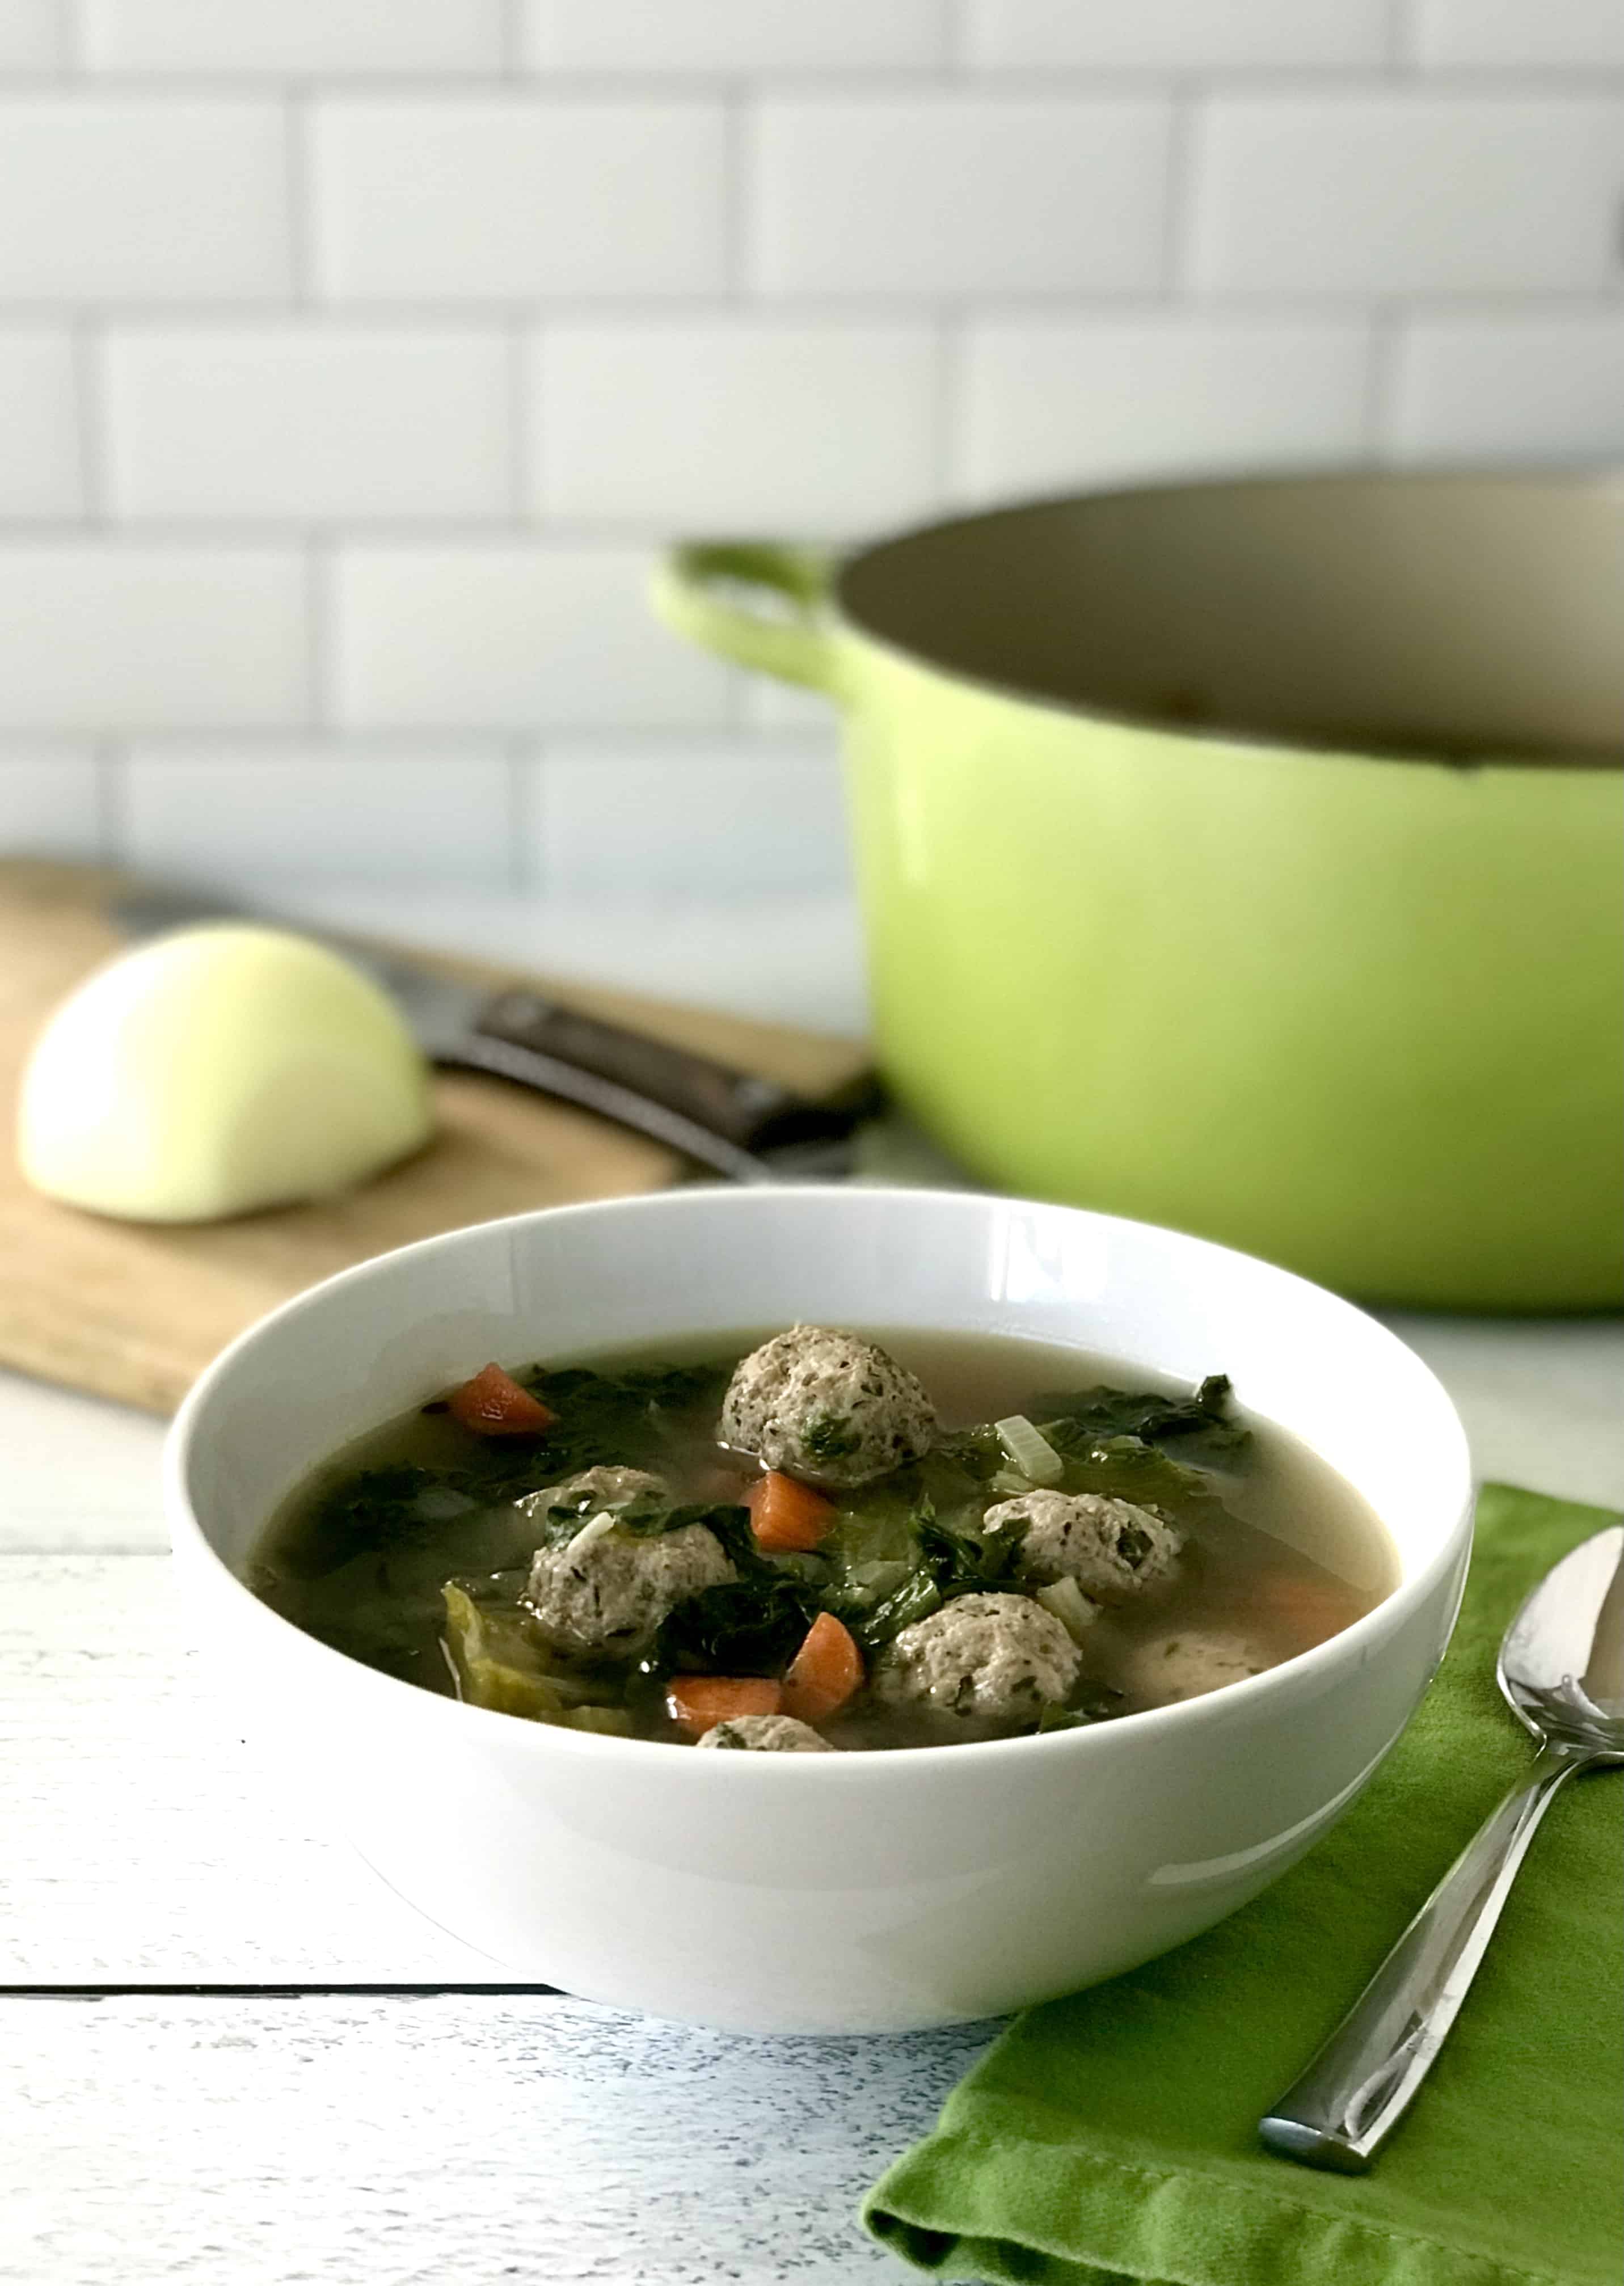 a gluten-free meatball vegetable soup in a white bowl next to a green napkin with a spoon on it